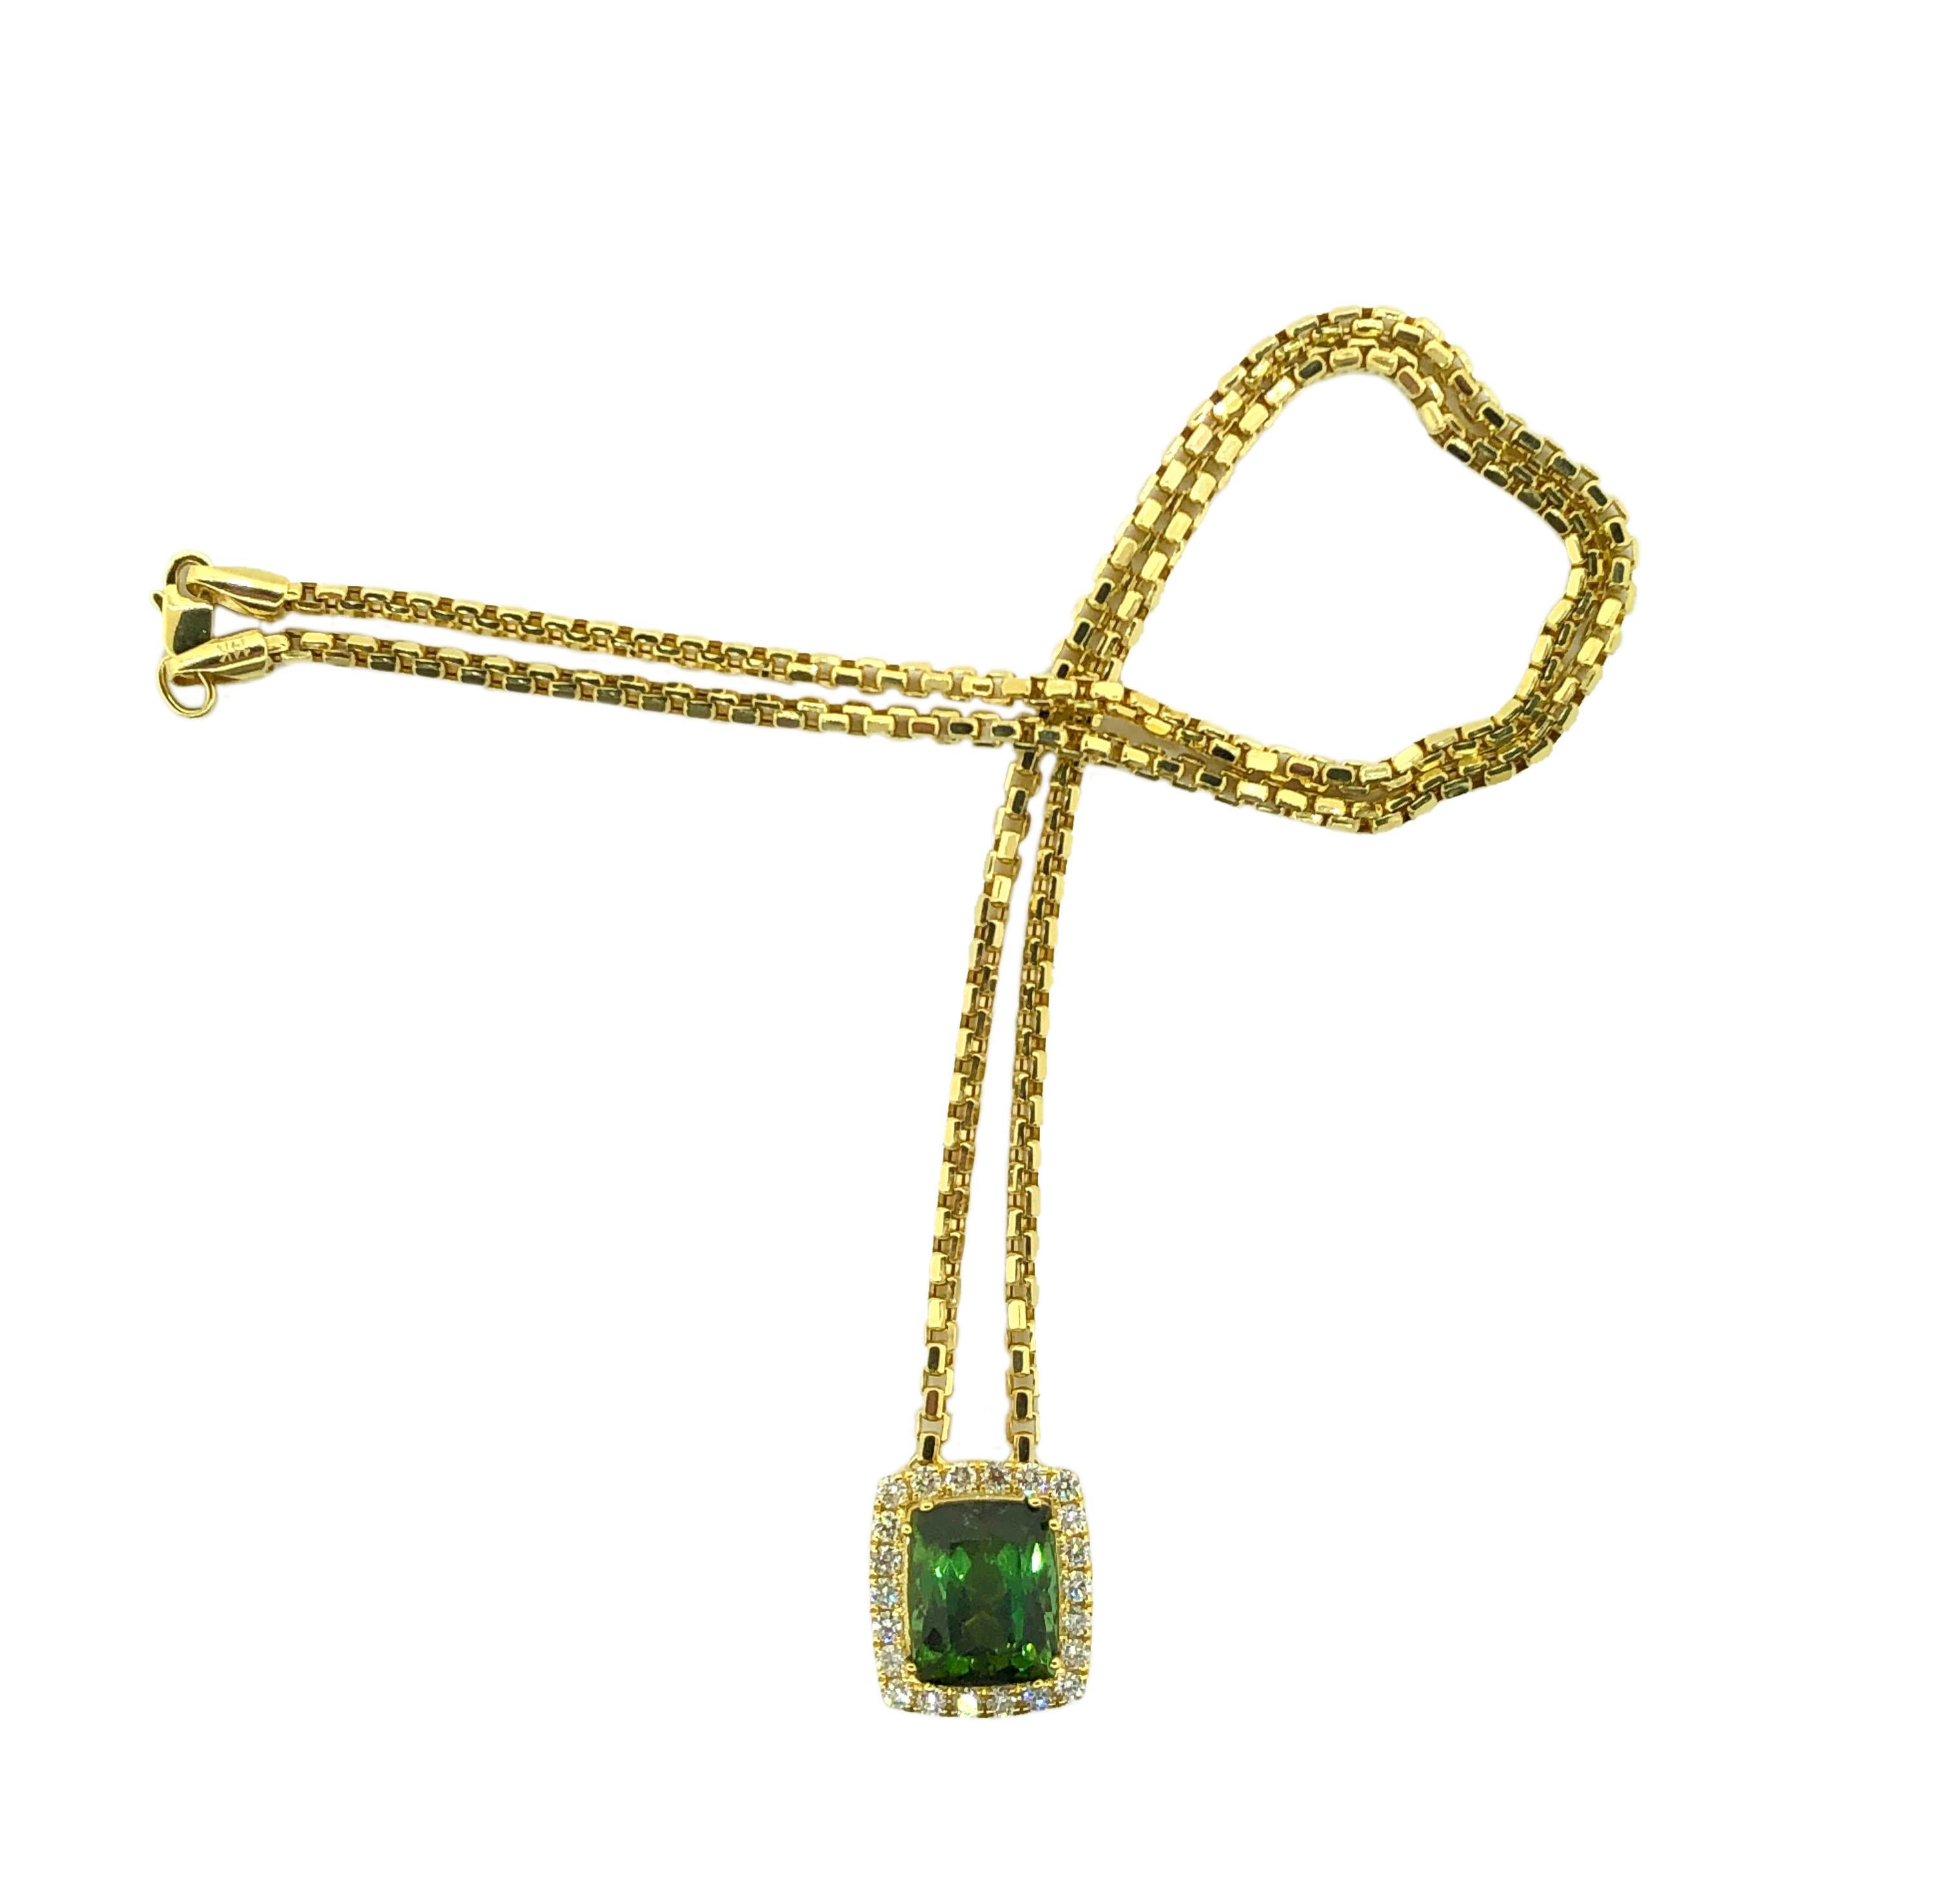 Showcasing a stunning and vibrant Green Tourmaline Necklace. The pendant offers a perfectly set center Cushion Cut Tourmaline, surrounded by two rows of round brilliant cut Round Diamonds suspended from a beautiful 22 inch chain, all in Yellow Gold.